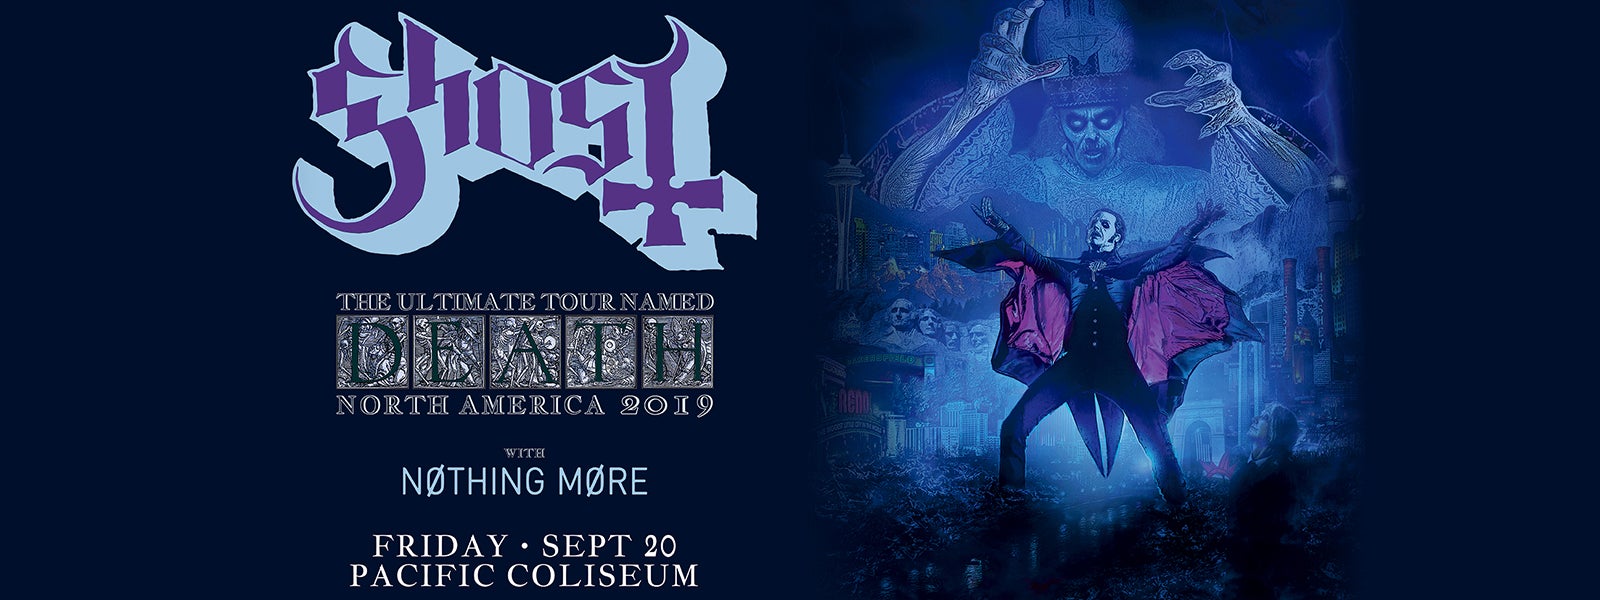 GHOST THE ULTIMATE TOUR NAMED DEATH TicketLeader